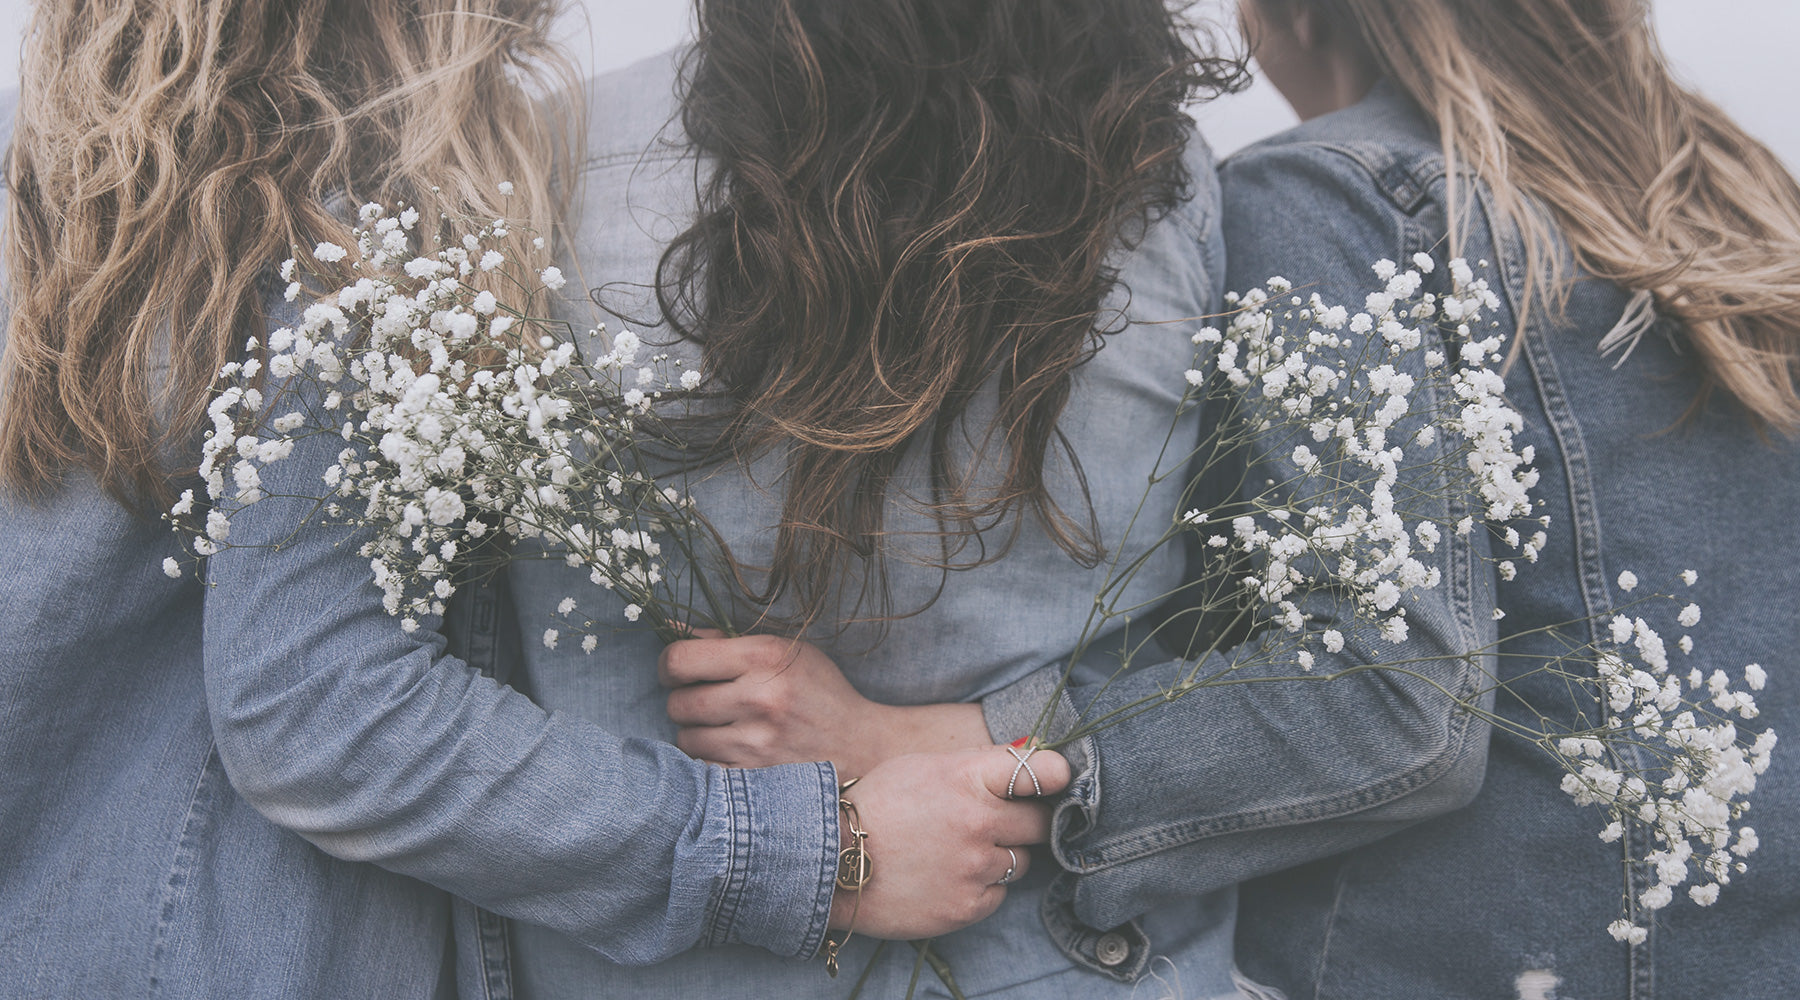 Women hugging and holding flowers